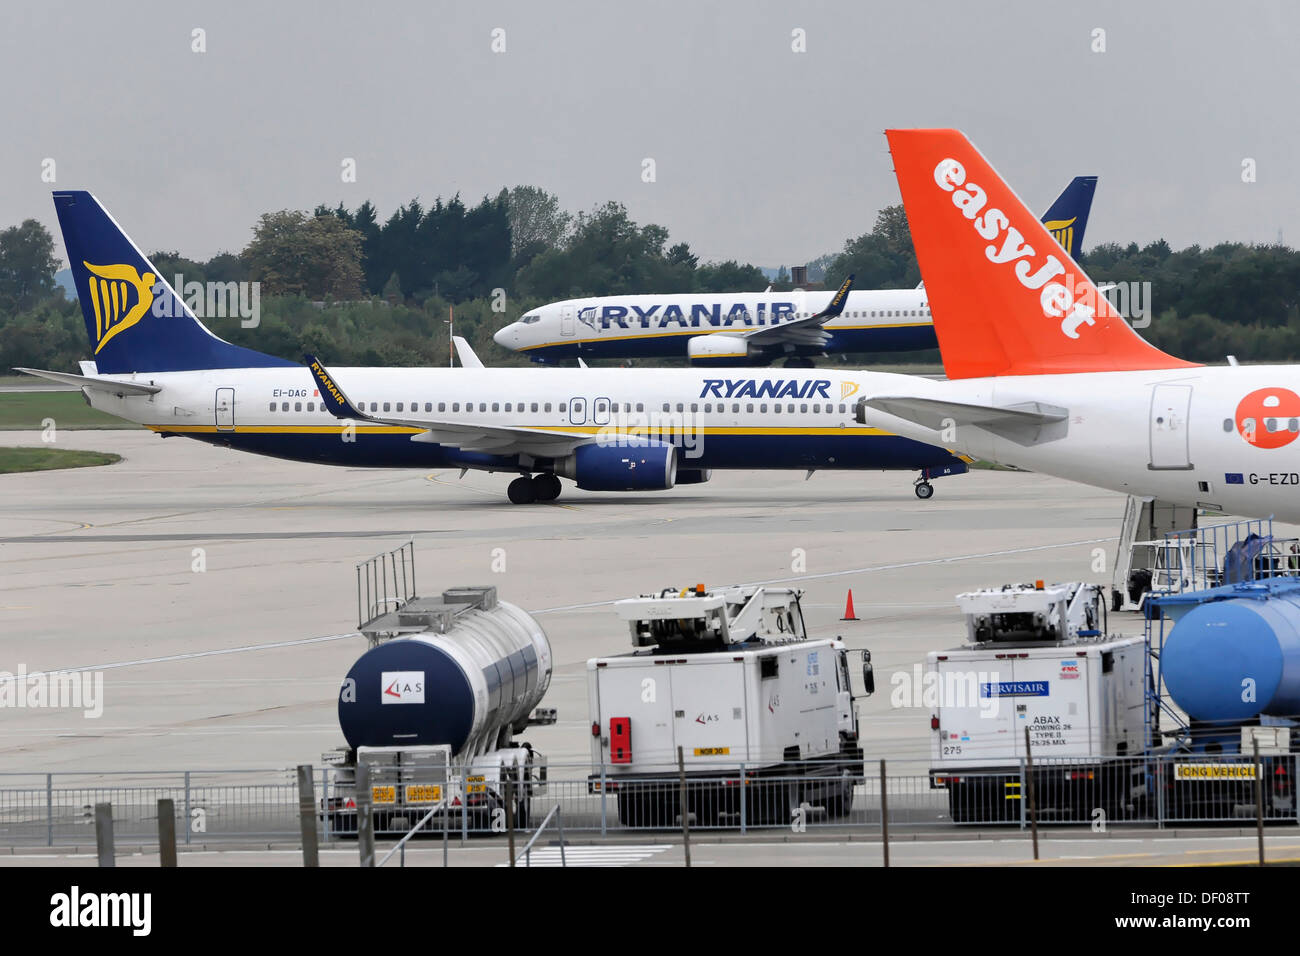 Aircraft and runway, London Stansted Airport, London, England, United Kingdom, Europe Stock Photo